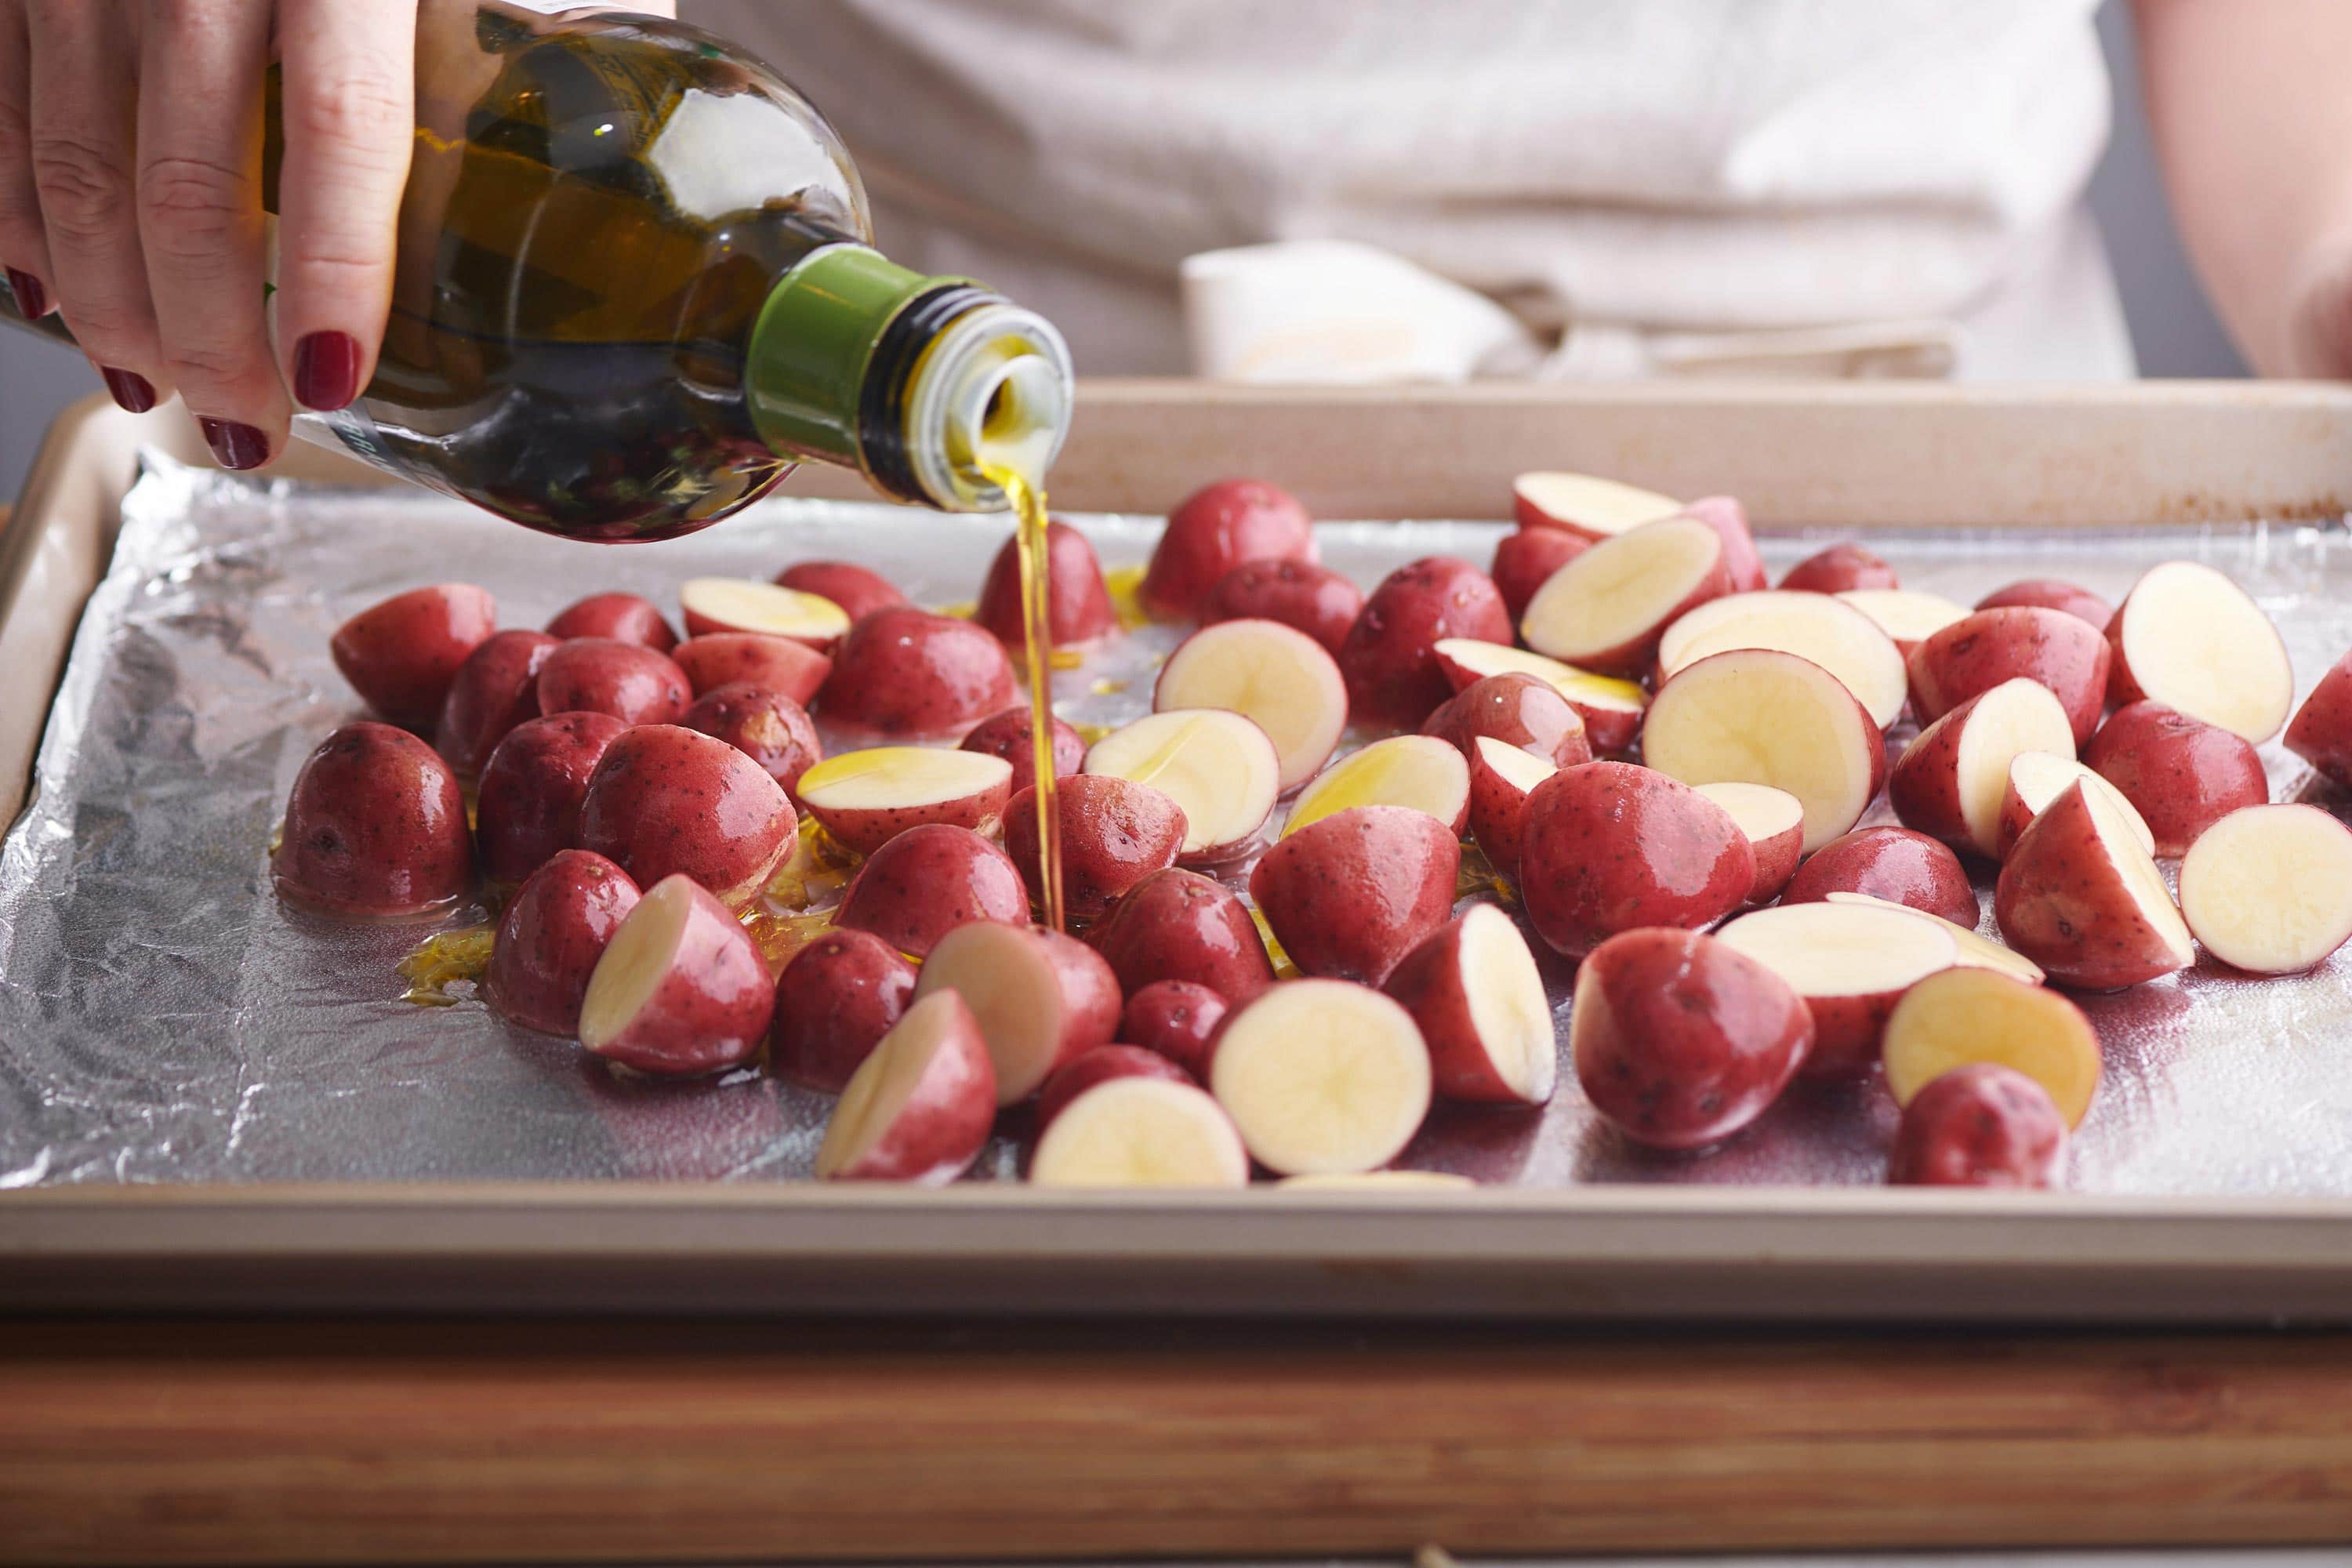 Olive oil drizzling on a foil lined baking sheet of halved red potatoes.